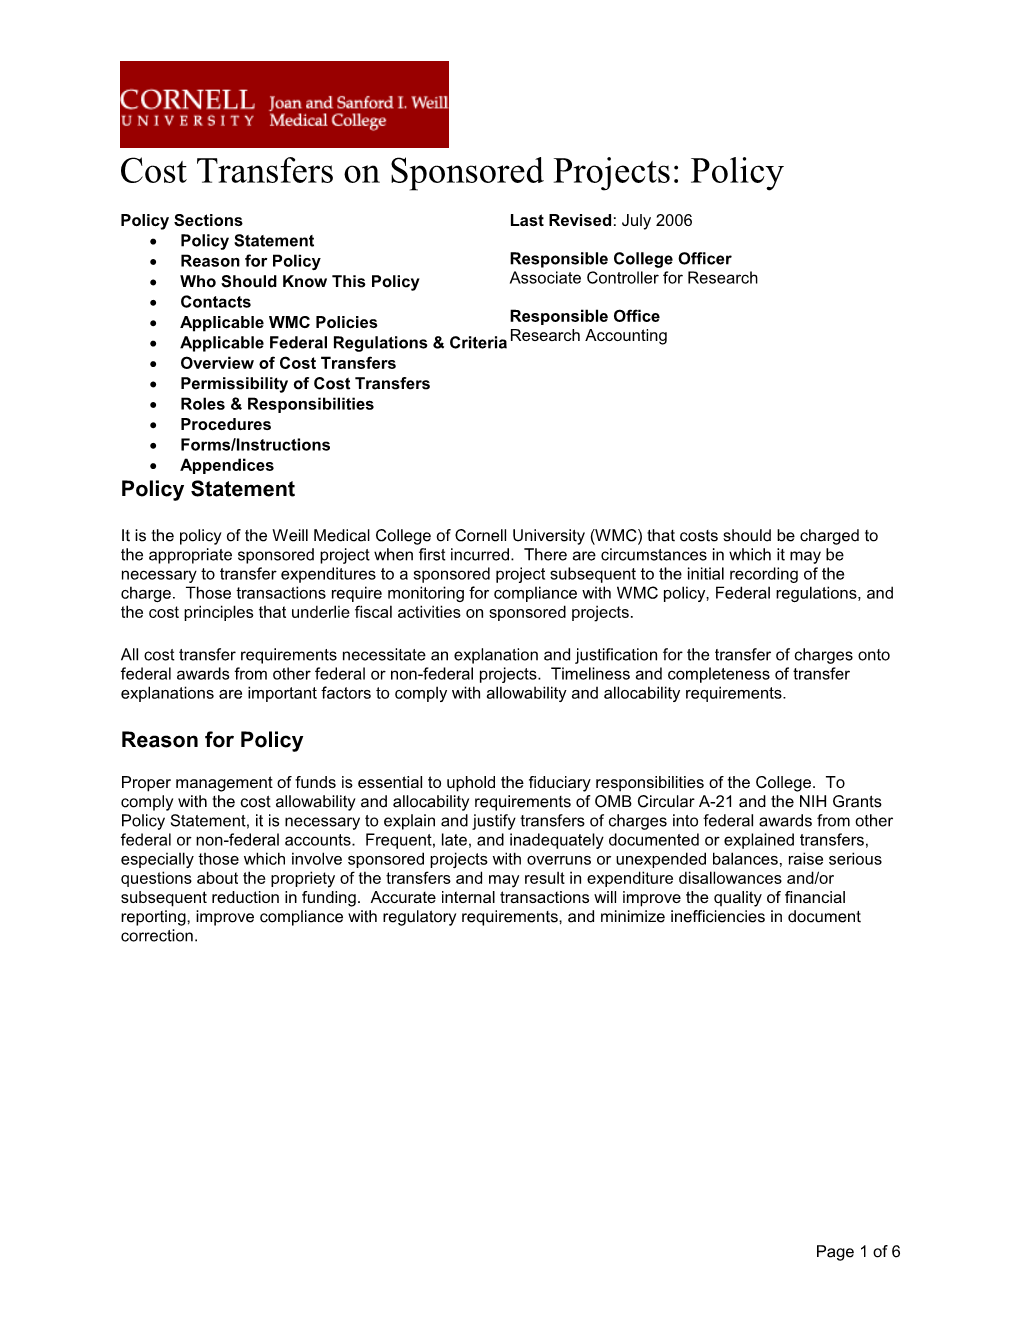 Cost Transfers on Sponsored Projects: Policy